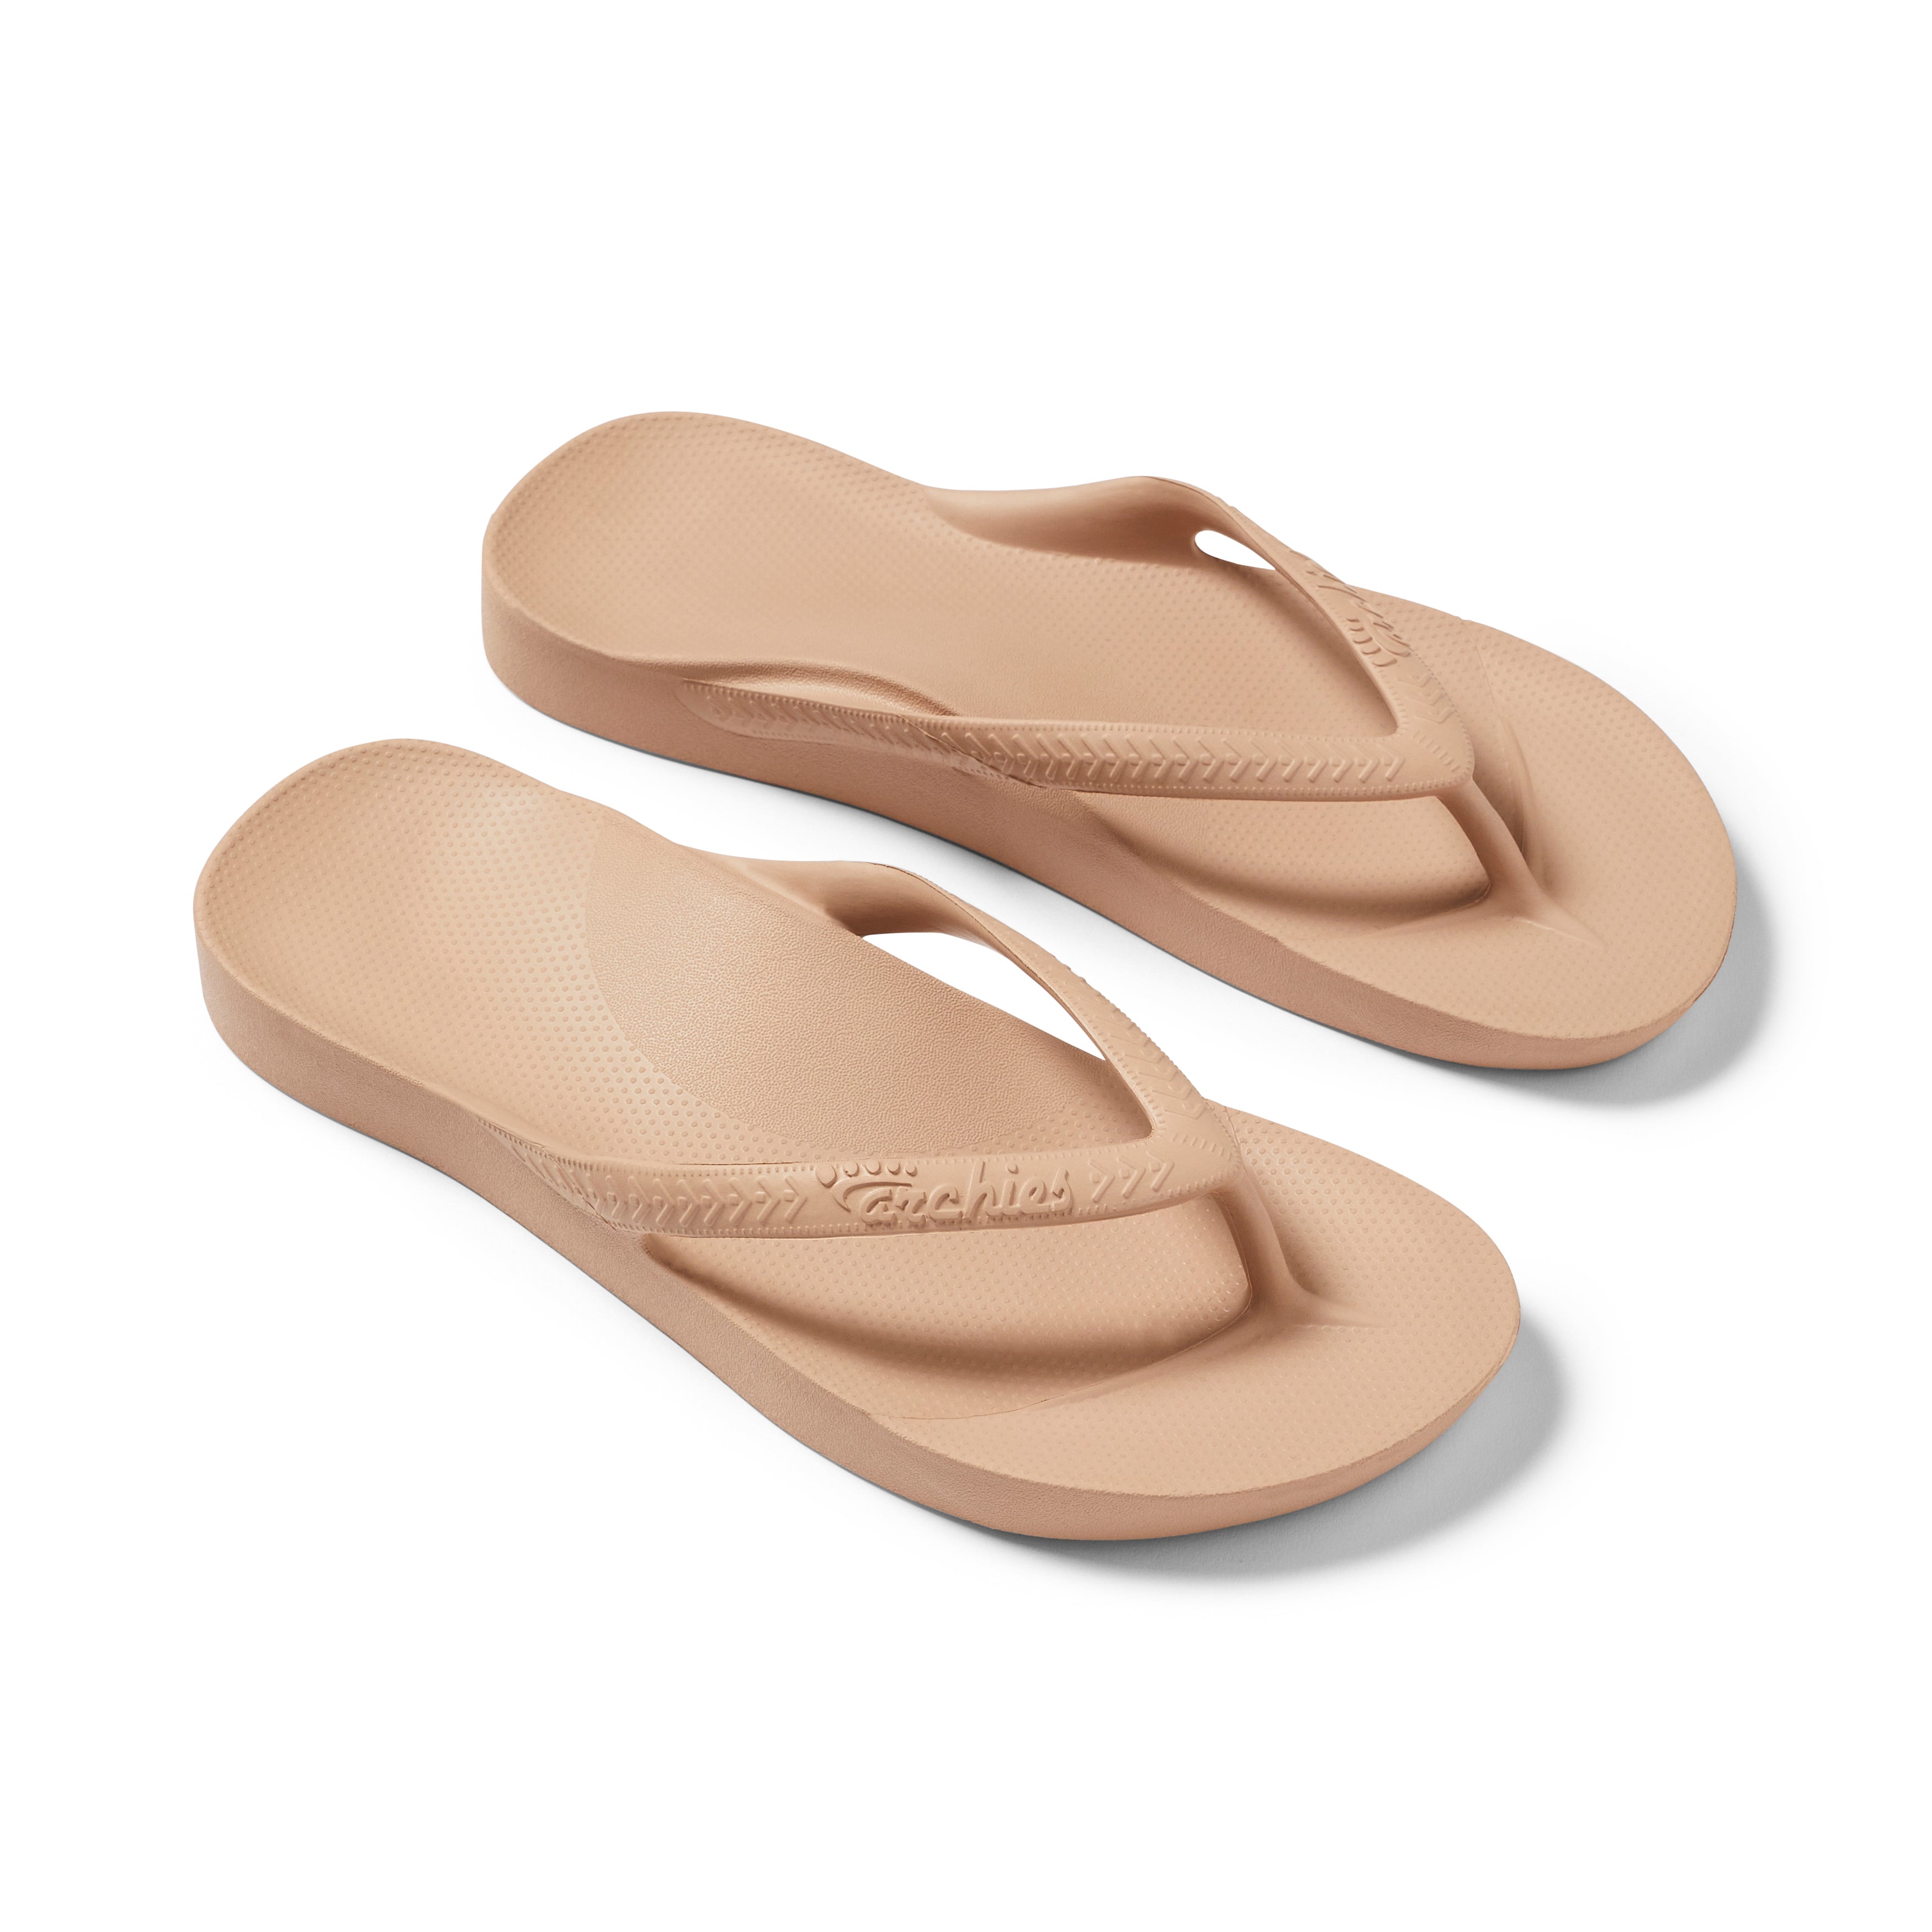 Archies Flip Flops Women 2023 Flip Flop Slippers for Woman Anti-Slip  Anti-Odor Flip Flops Thickened and Widened All-Round Foot Feel More  Comfortable 